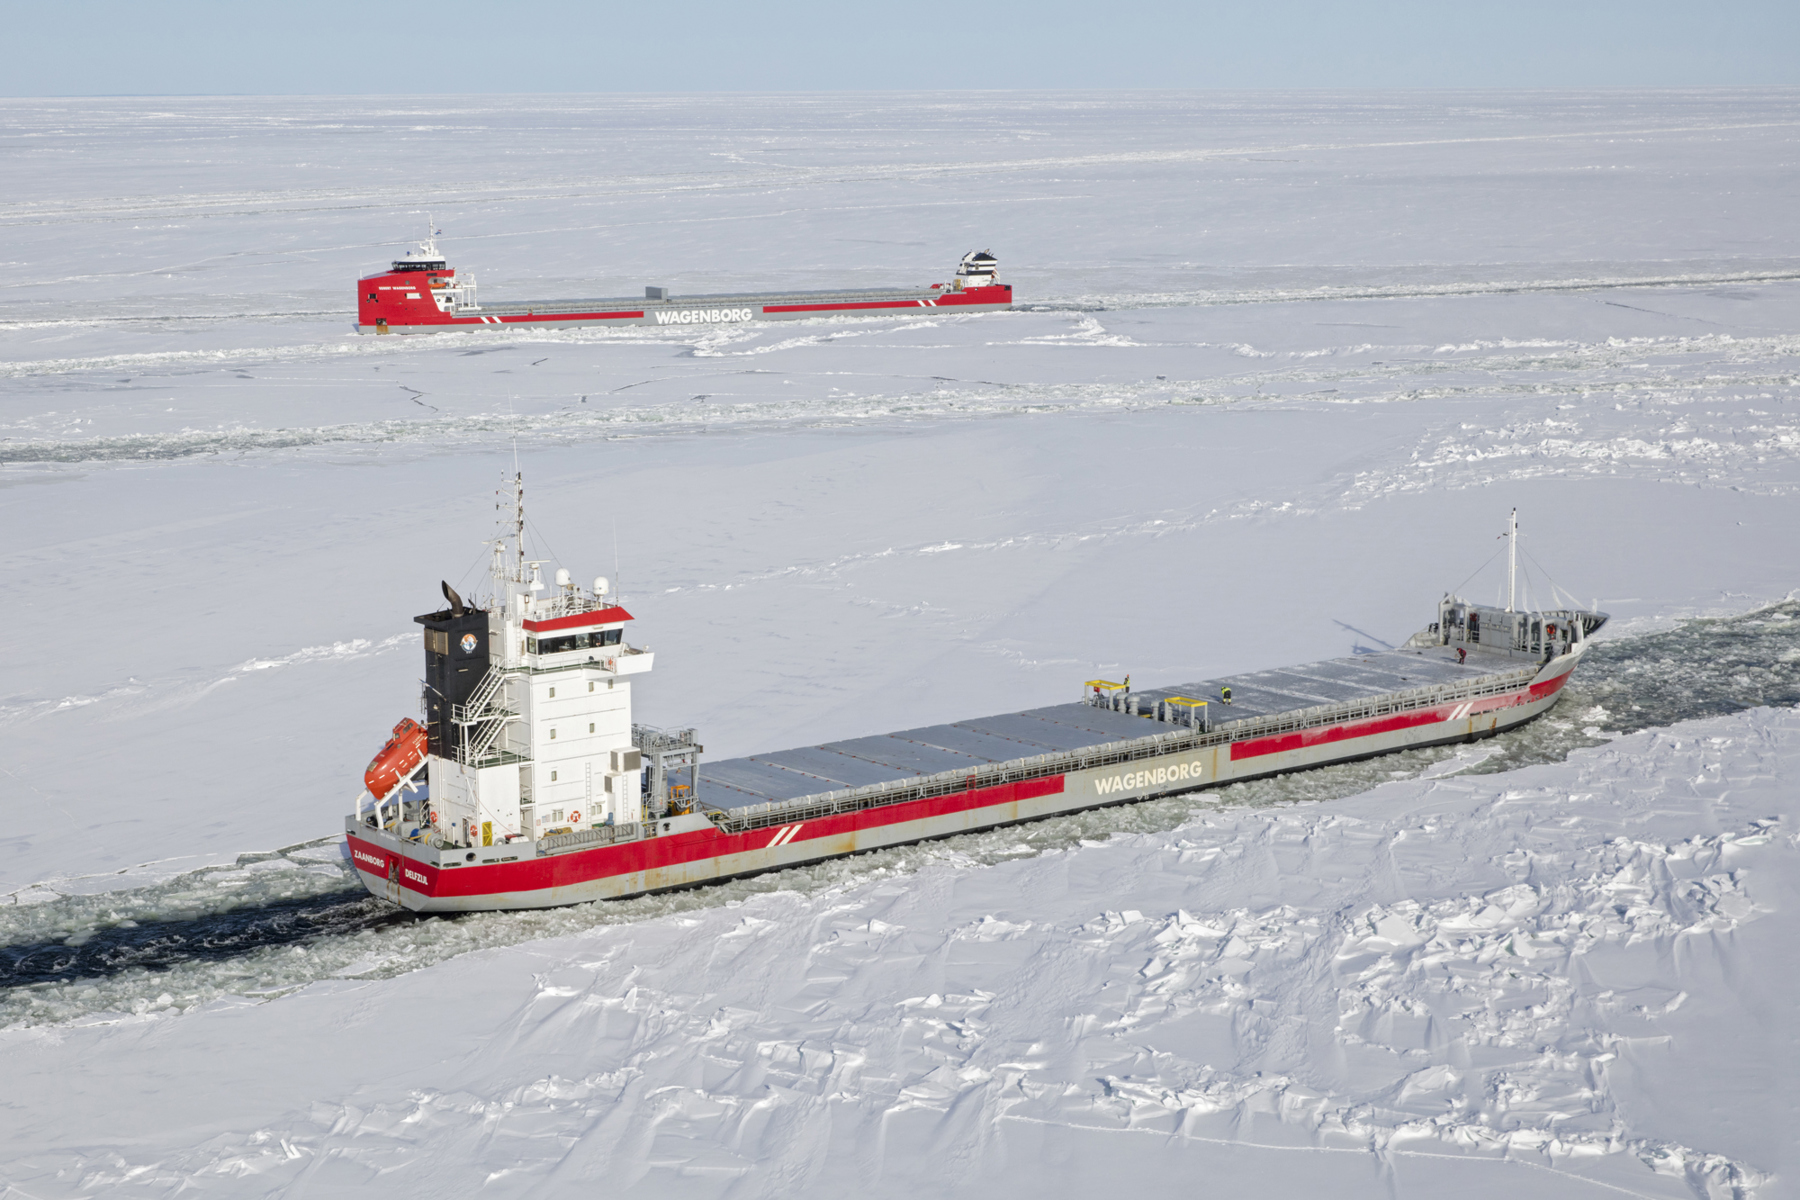 The existing Wagenborg fleet is characterised by largely ice-strengthened tonnage in a number of tonnage segments.